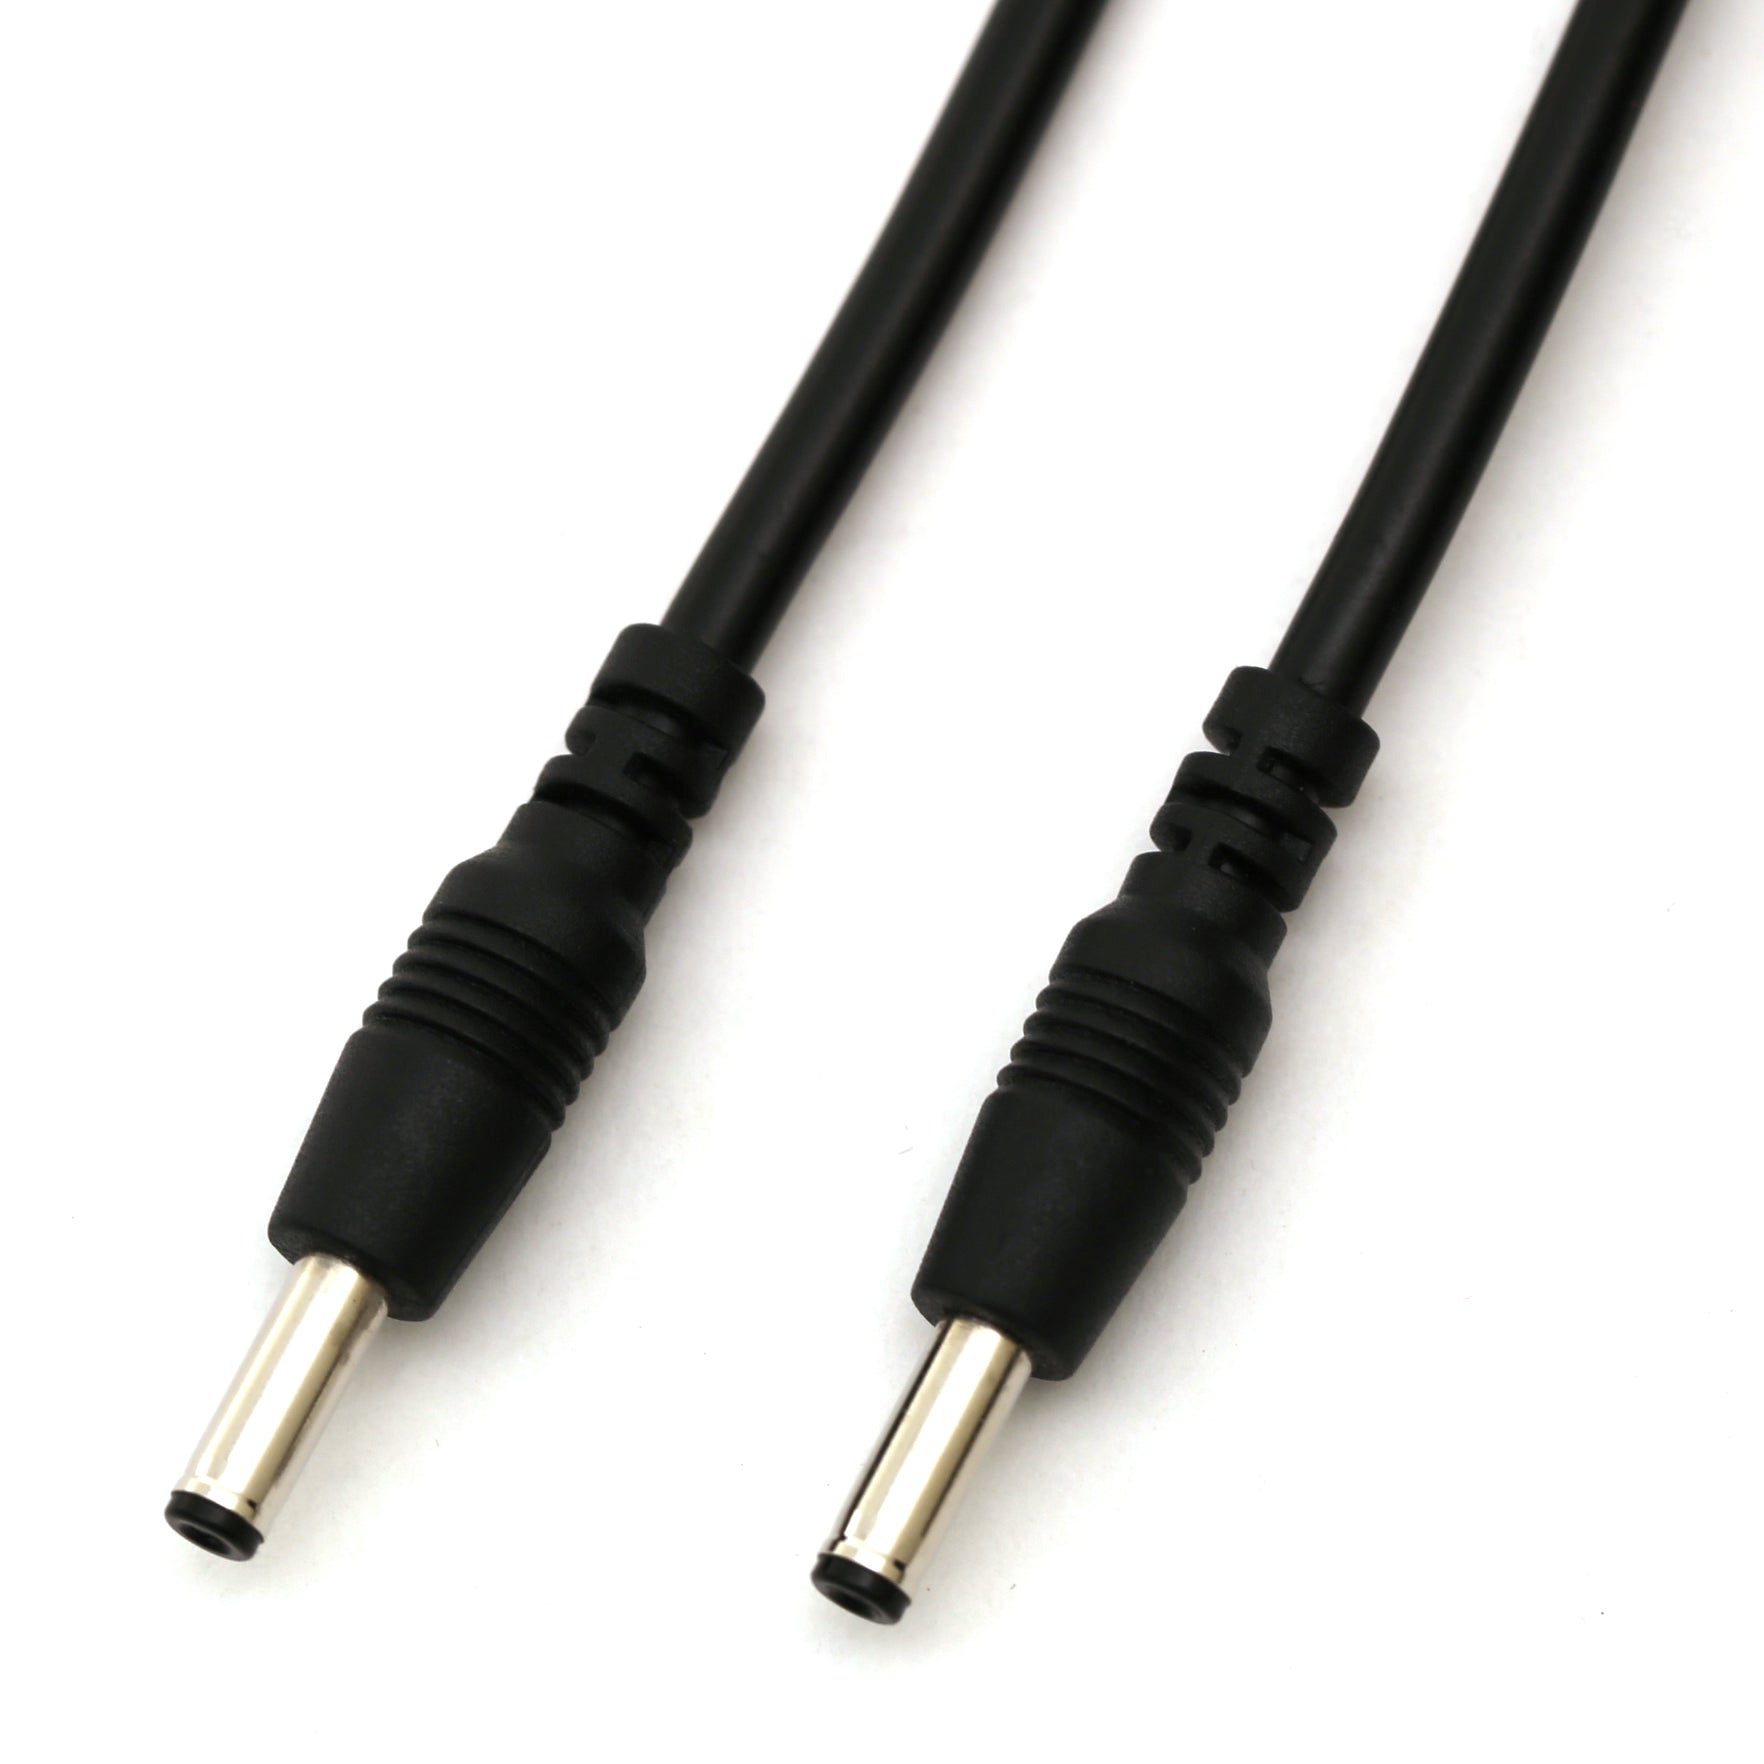 15ft In-Wall Rated Interconnect Cable for Modular LED Under Cabinet Lighting (Black)